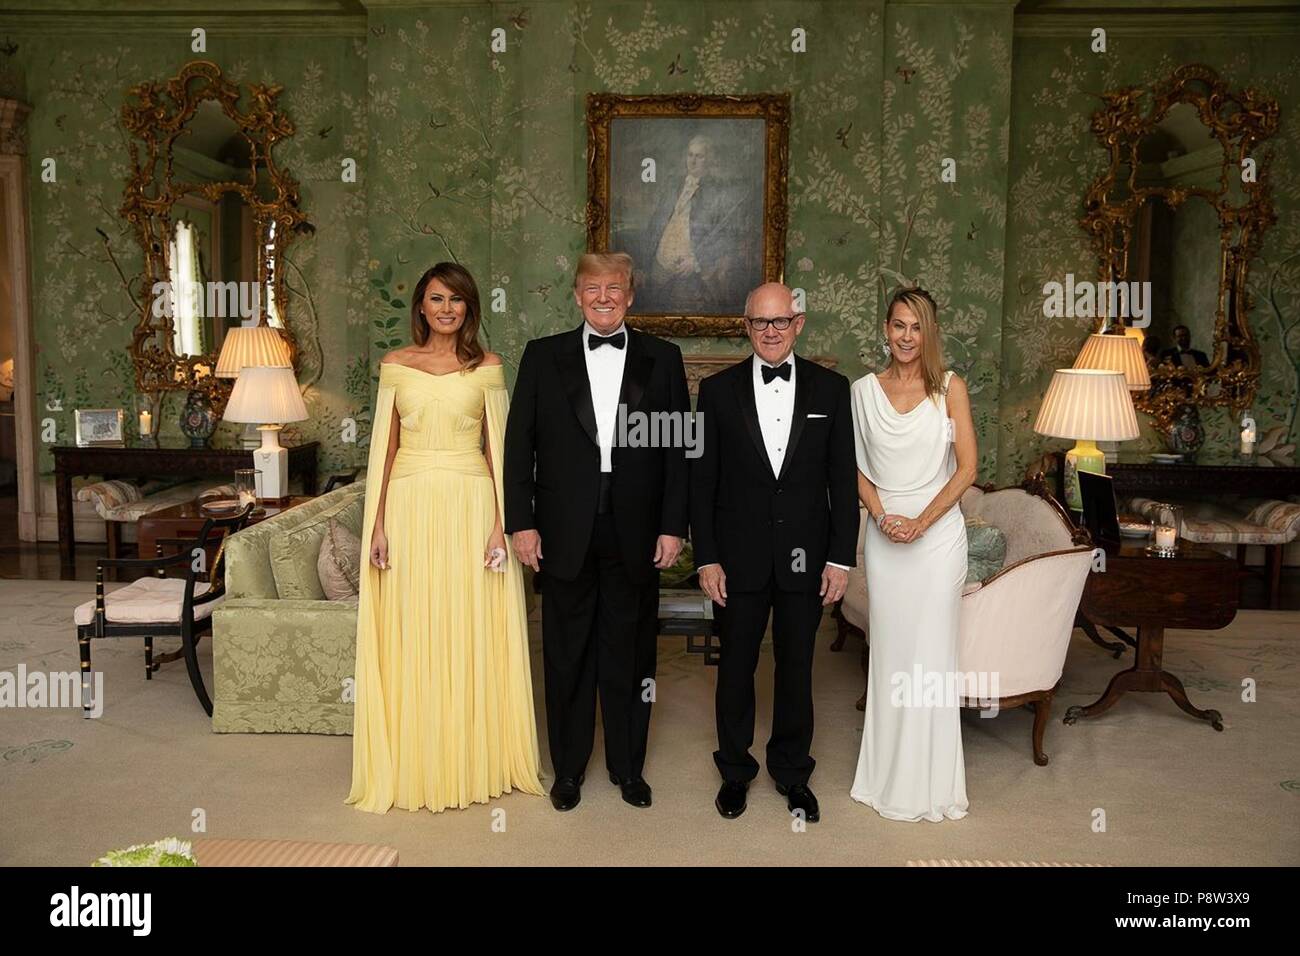 London, UK, 13 July 2018. U.S President Donald Trump and First Lady Melania Trump stand with American Ambassador to the United Kingdom Woody Johnson and his wife Suzanne Ircha at Winfield House prior to departing for dinner at Blenheim Palace hosted by Prime Minister Theresa May and Philip May July 12, 2018 in London, England. Credit: Planetpix/Alamy Live News Stock Photo